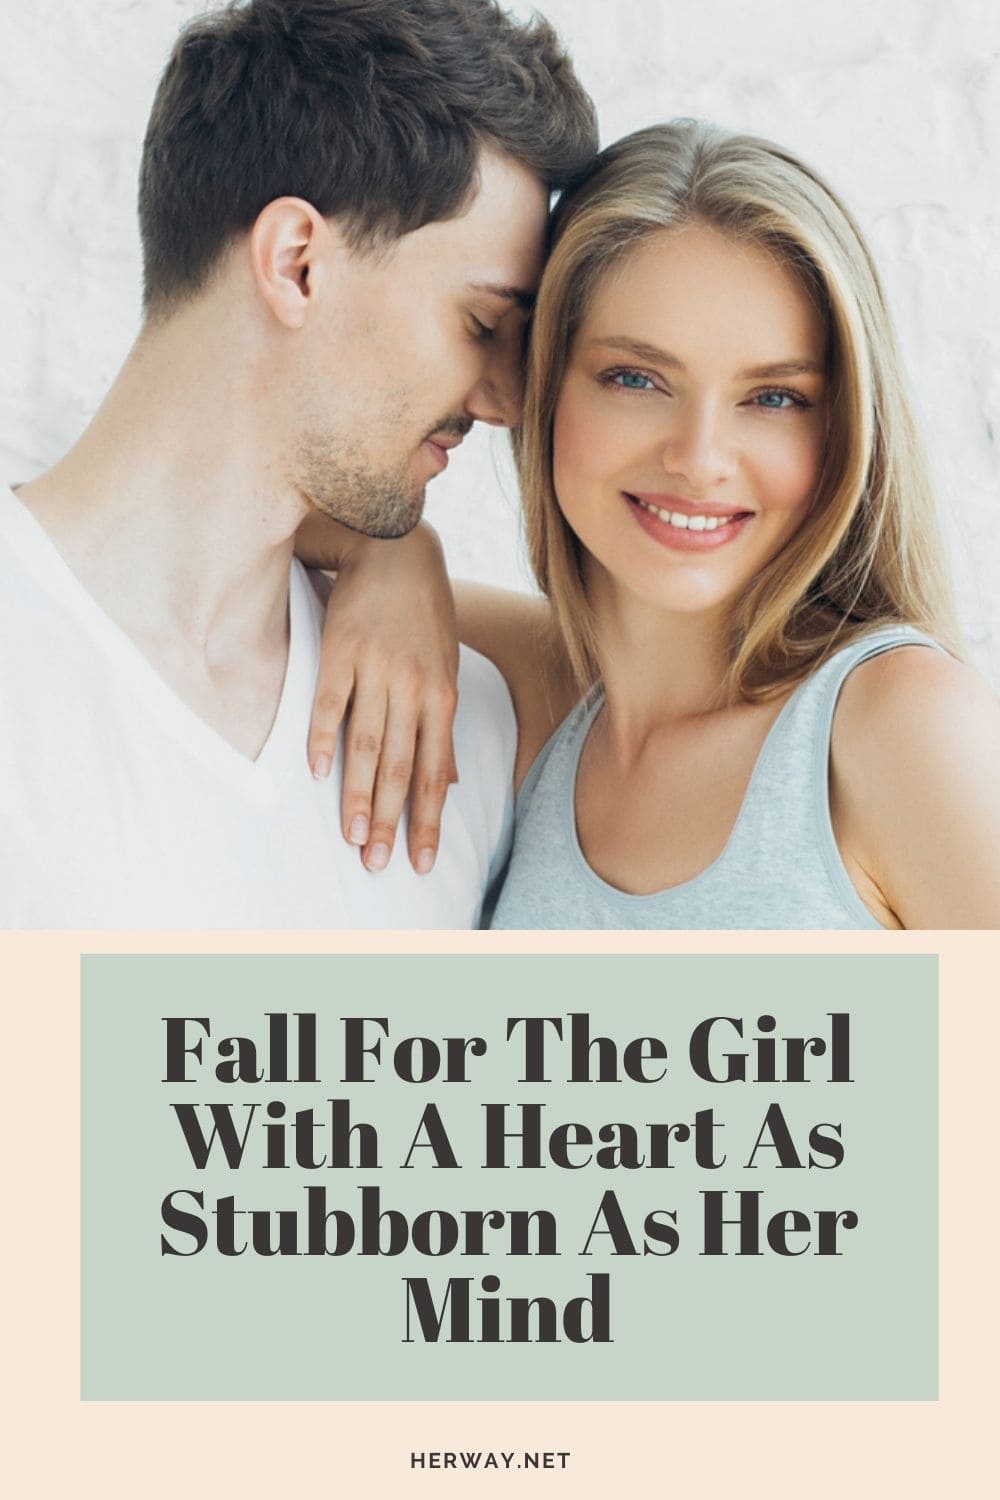 Fall For The Girl With A Heart As Stubborn As Her Mind